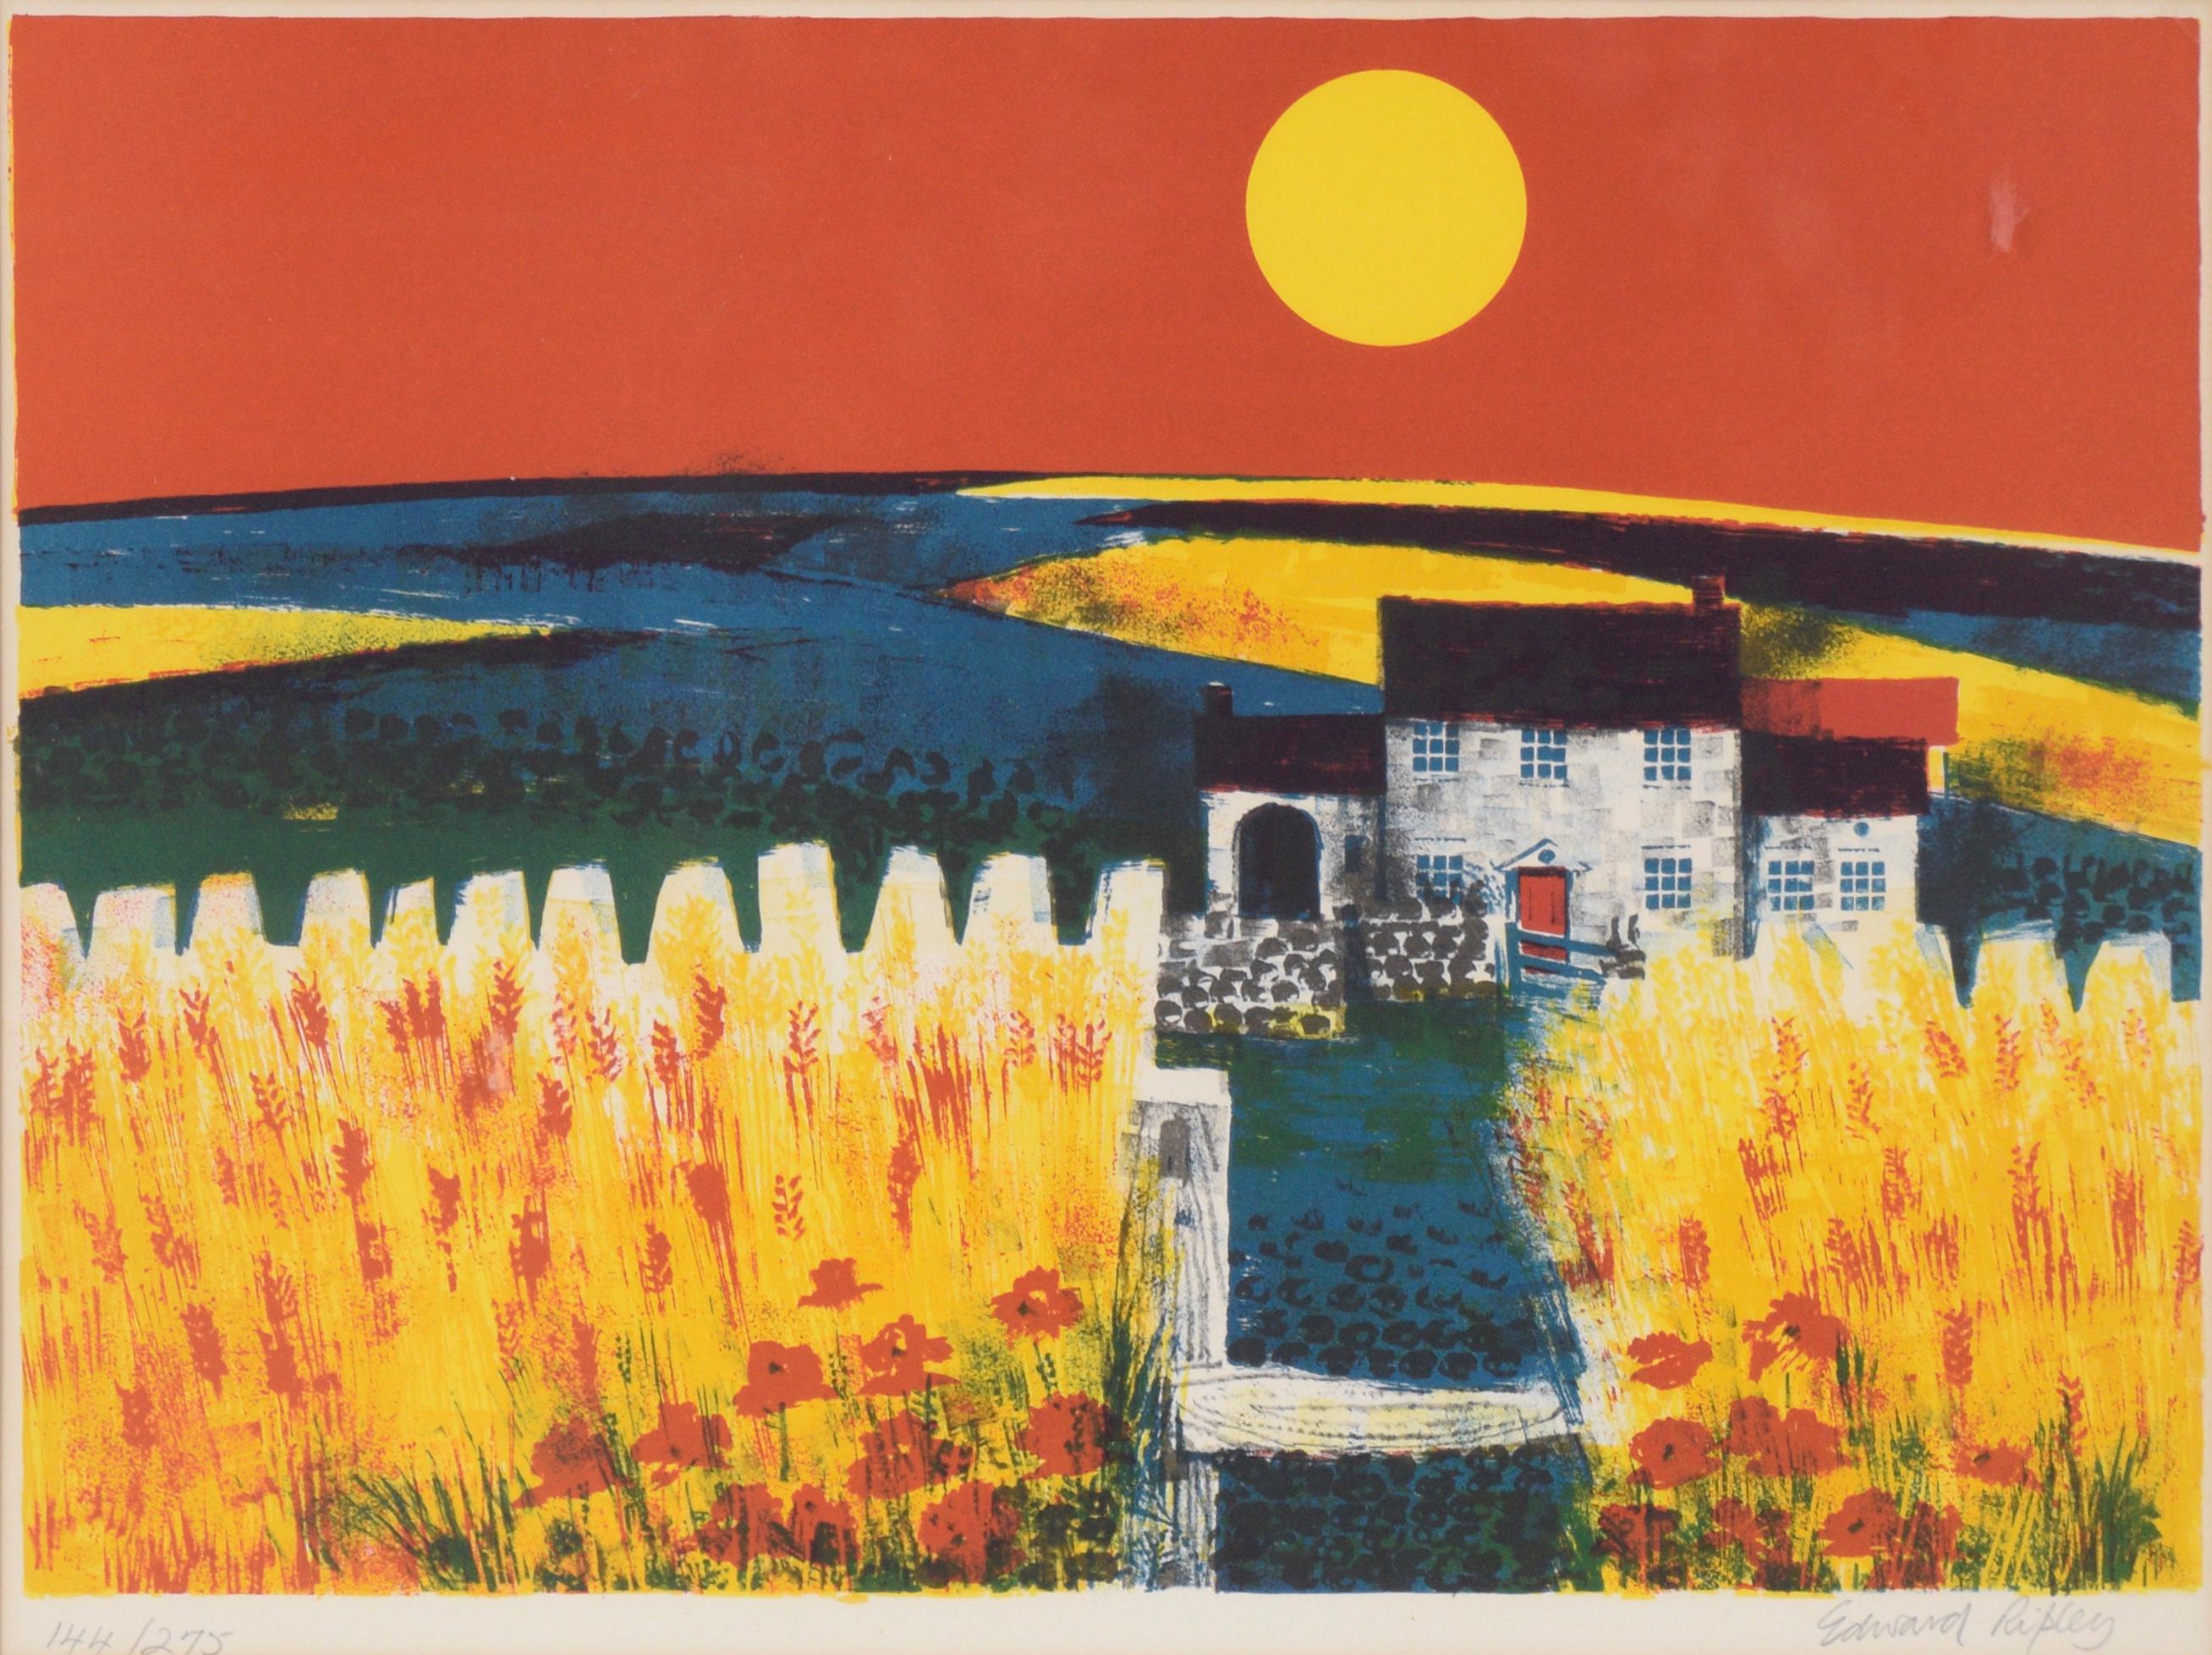 Farmhouse and the Wheat Field at Sunset - Landscape Lithograph in Ink on Paper - Print by Edward Ripley